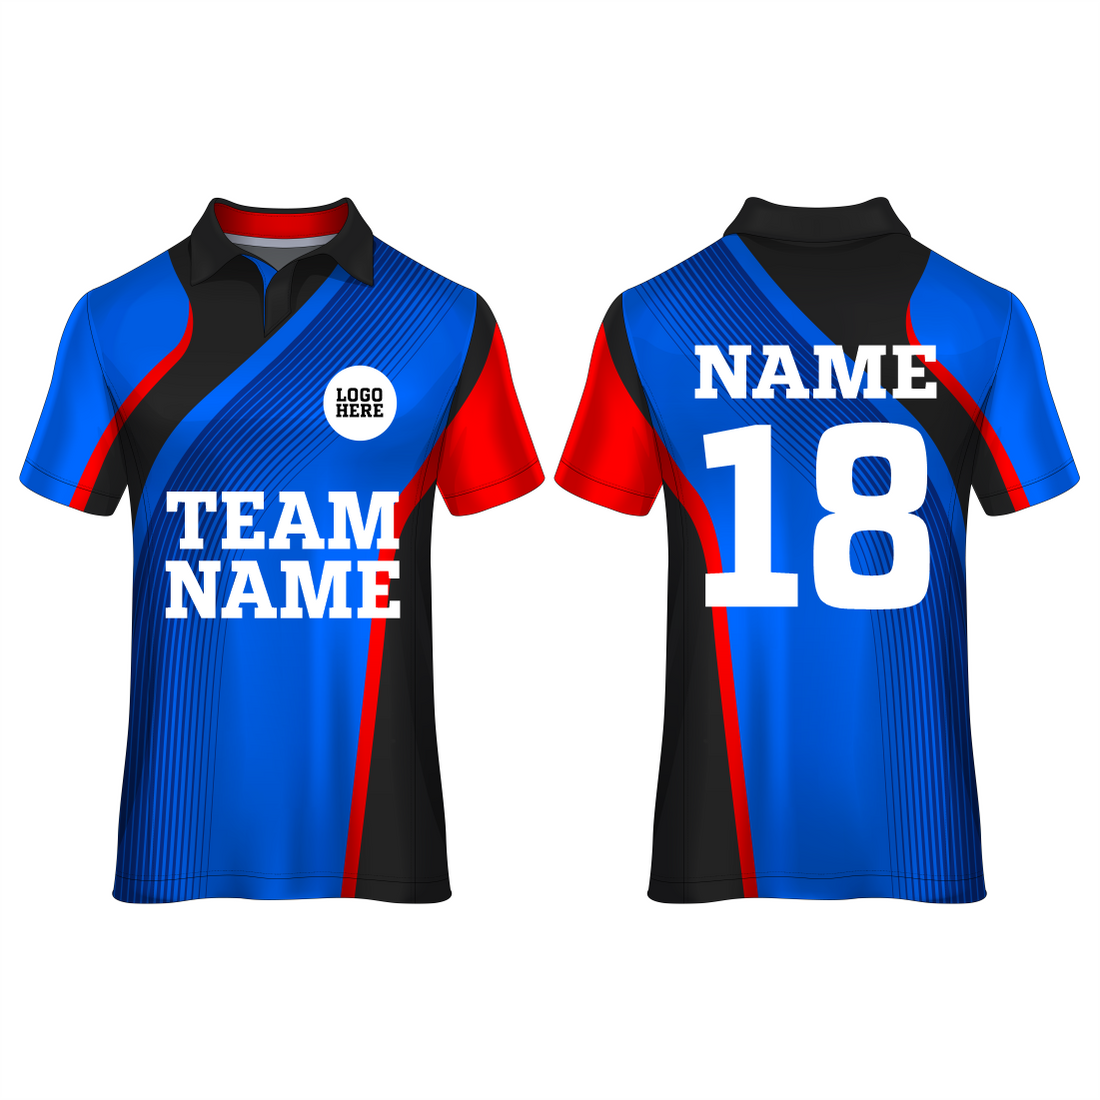 NEXT PRINT All Over Printed Customized Sublimation T-Shirt Unisex Sports Jersey Player Name & Number, Team Name And Logo.1440881618